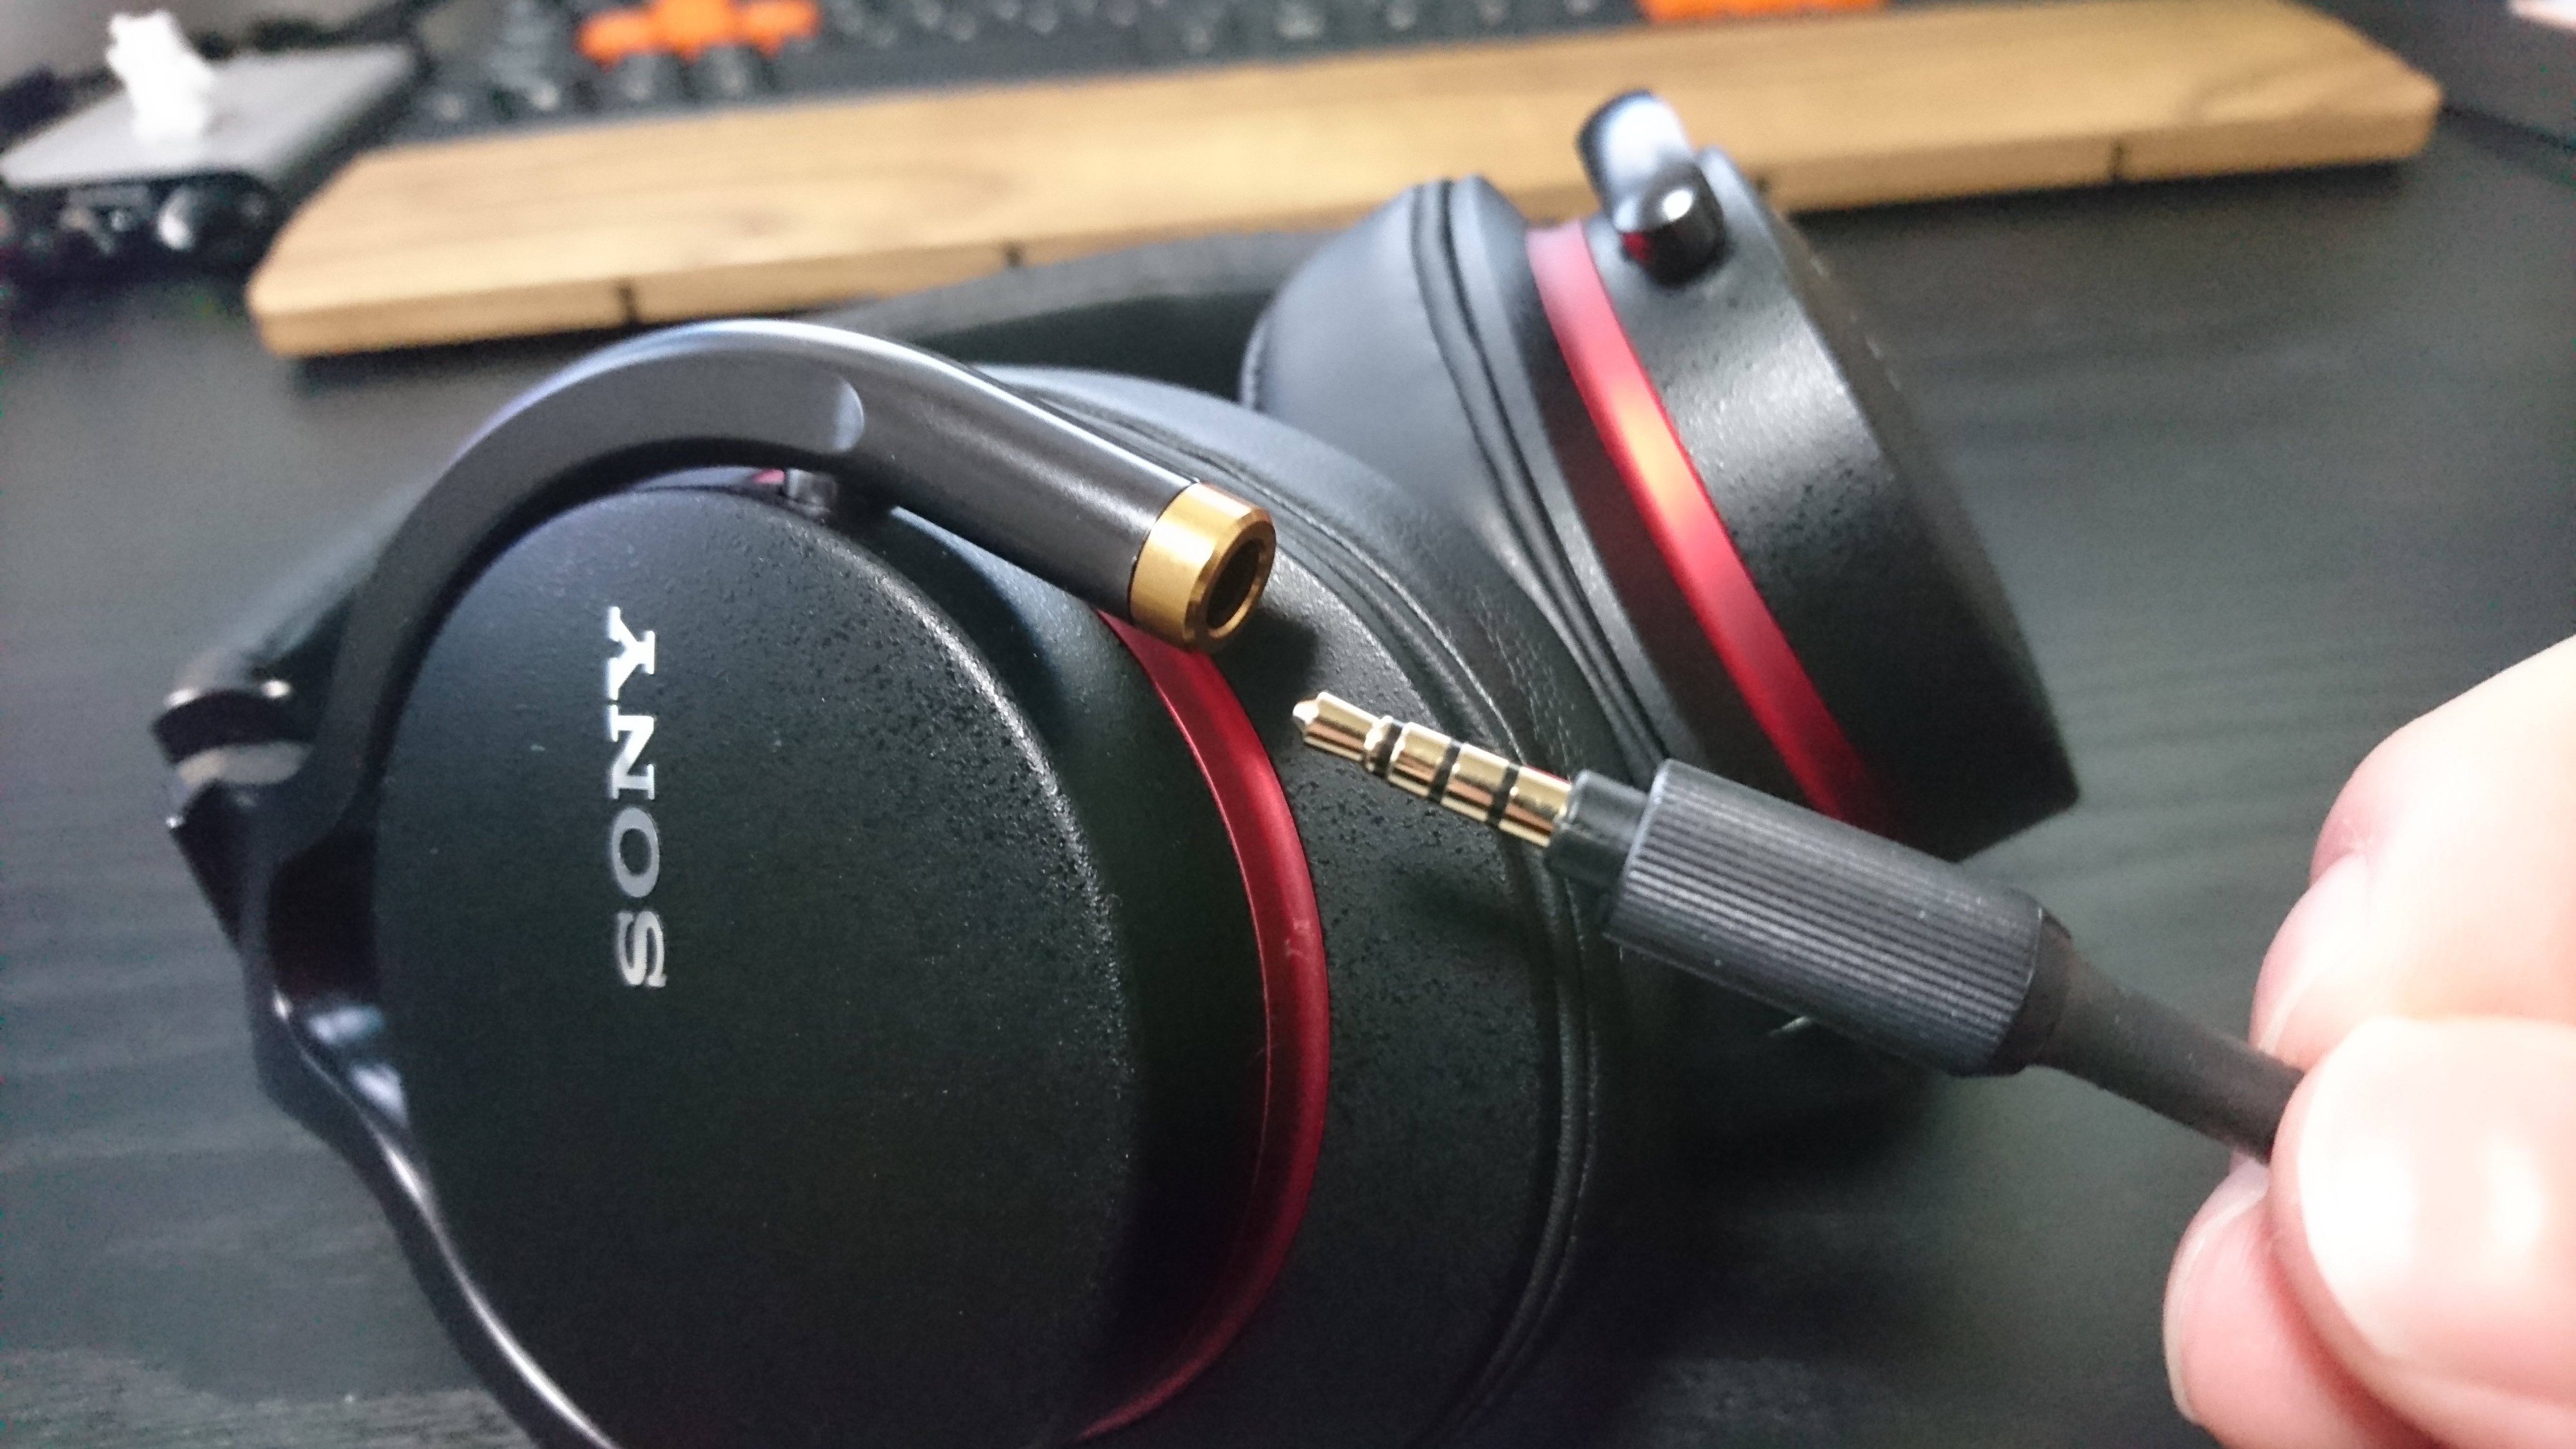 SONY MDR-1A ハイレゾヘッドフォン レビュー | 雑談記